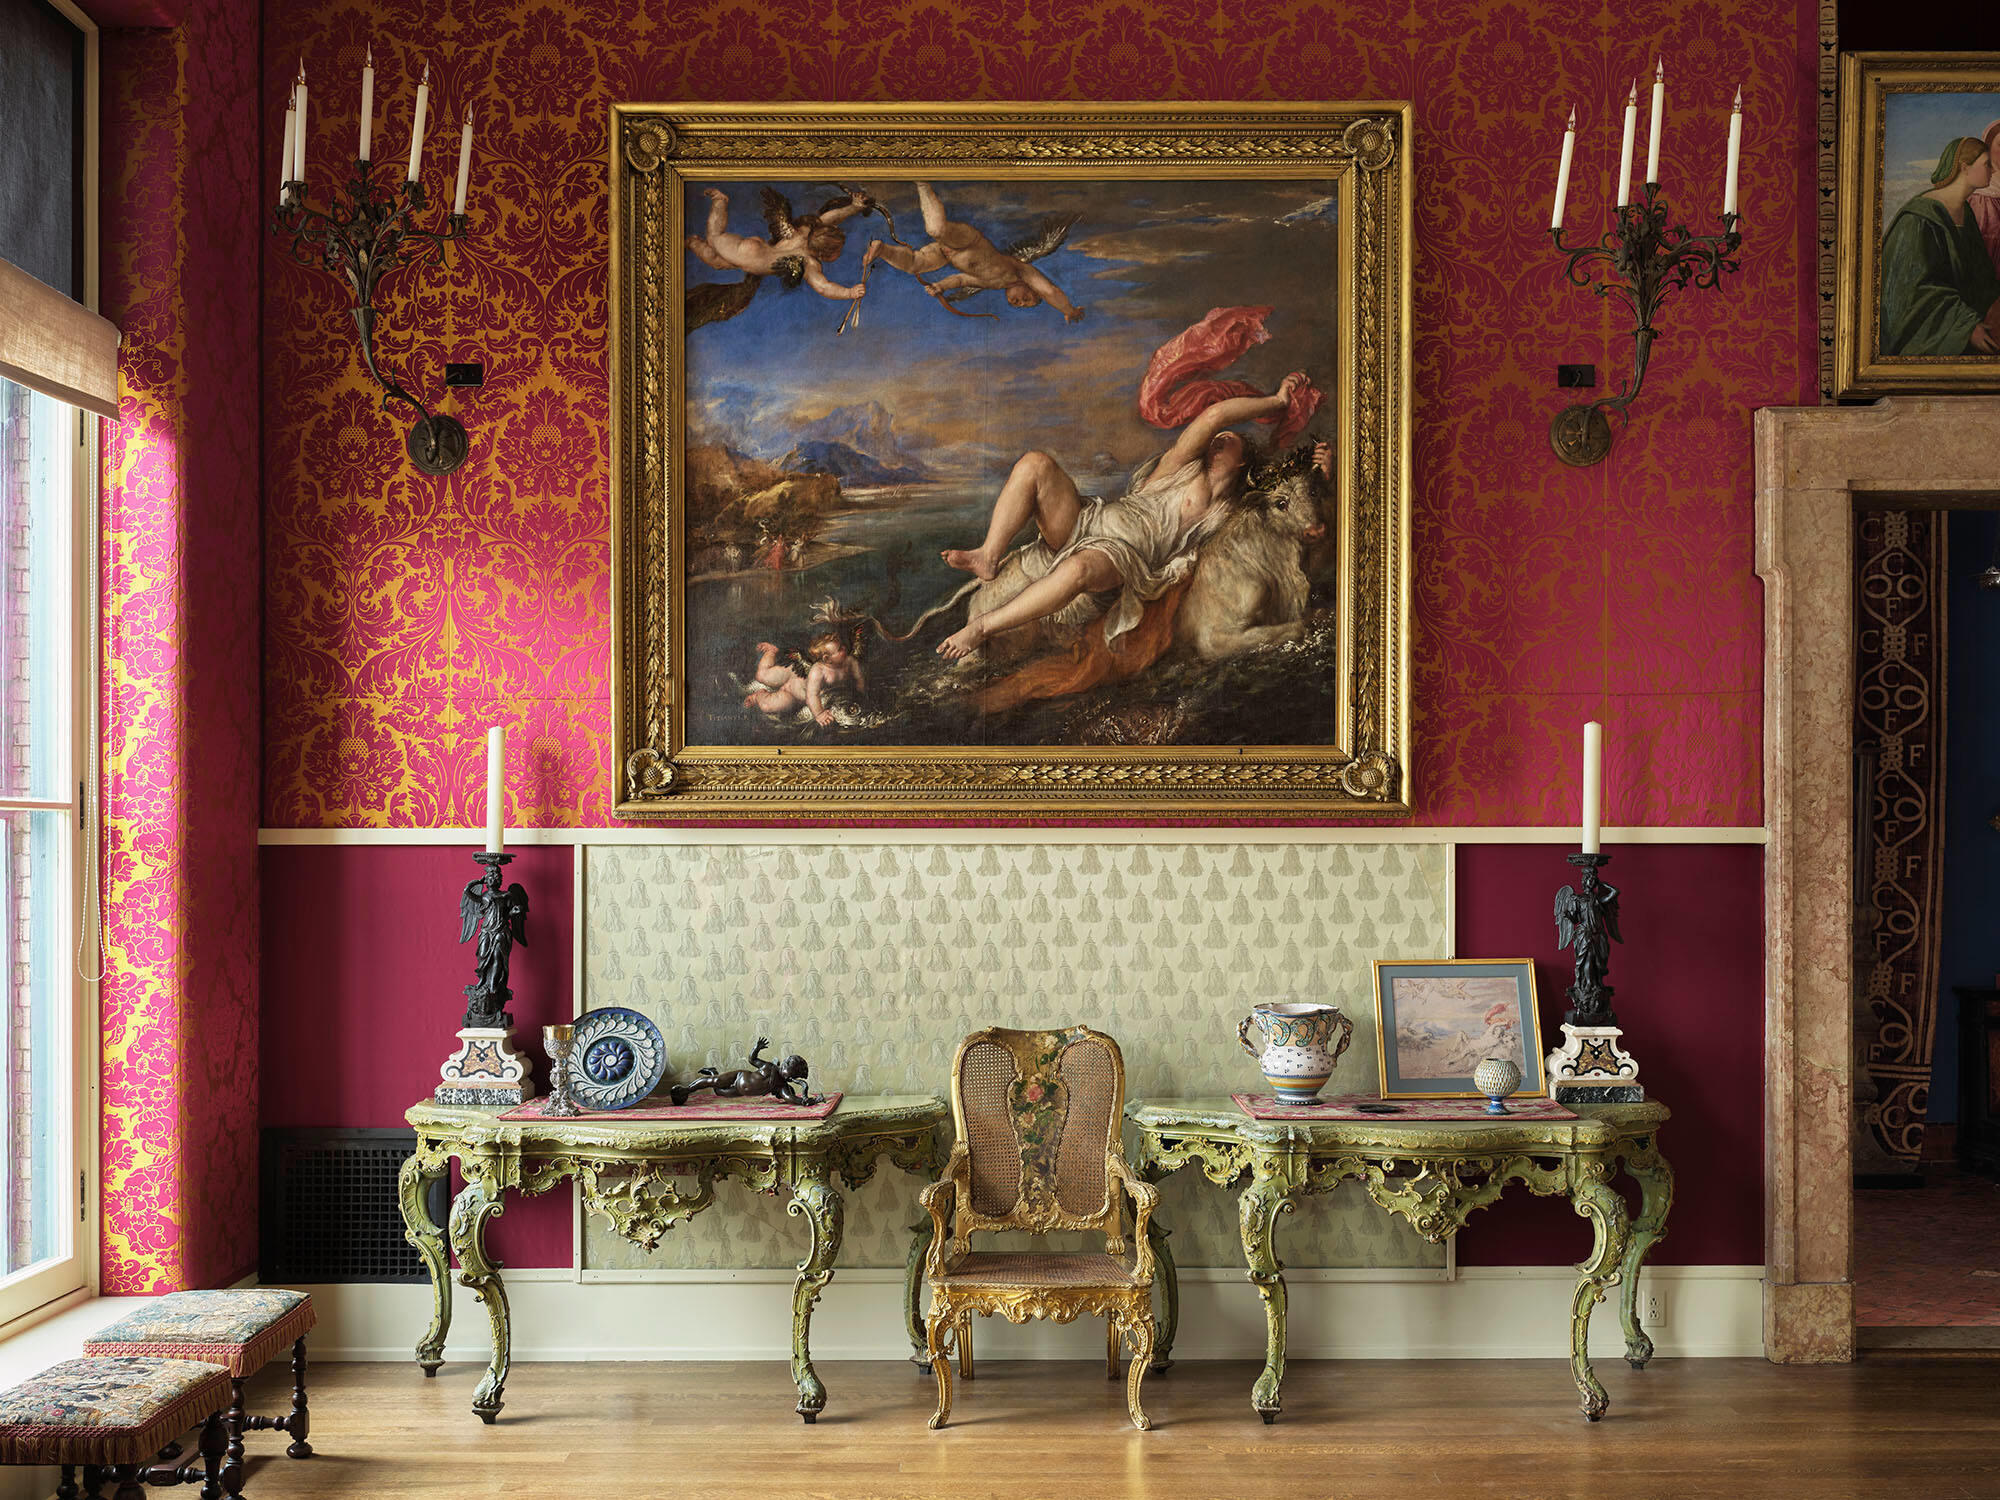 View of the Titian Room, including a large swatch of light-colored fabric with tassels made by Charles Frederick Worth